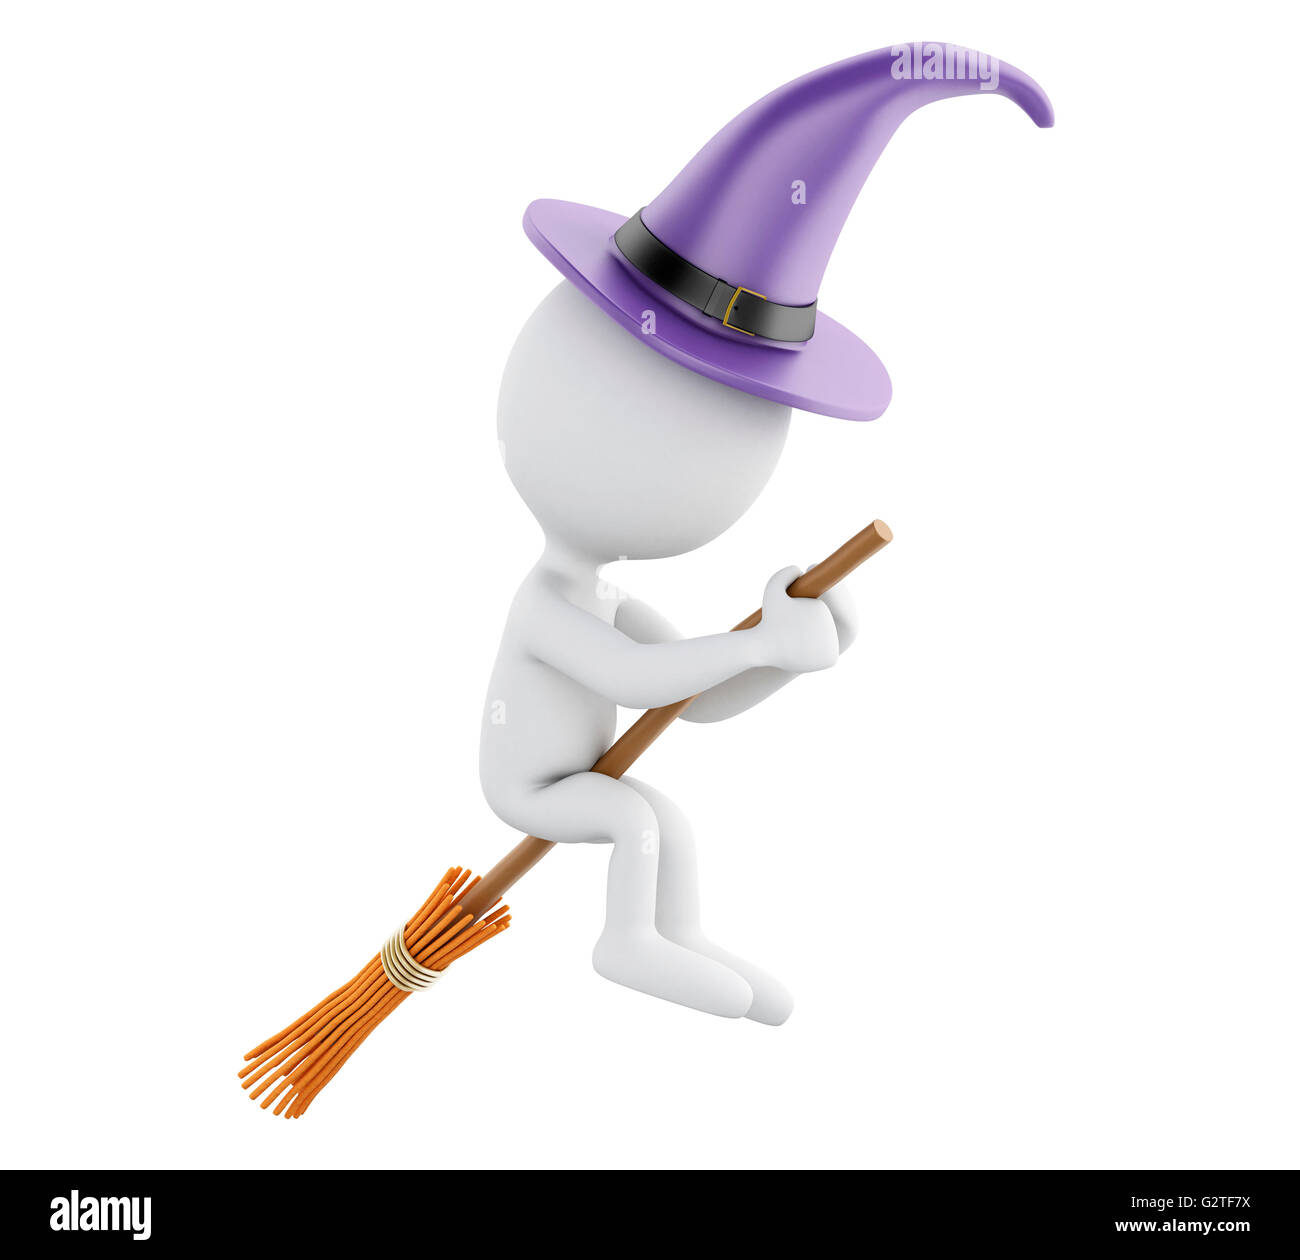 3d renderer image. Witch flying on broom. Halloween concept. Isolated white background. Stock Photo